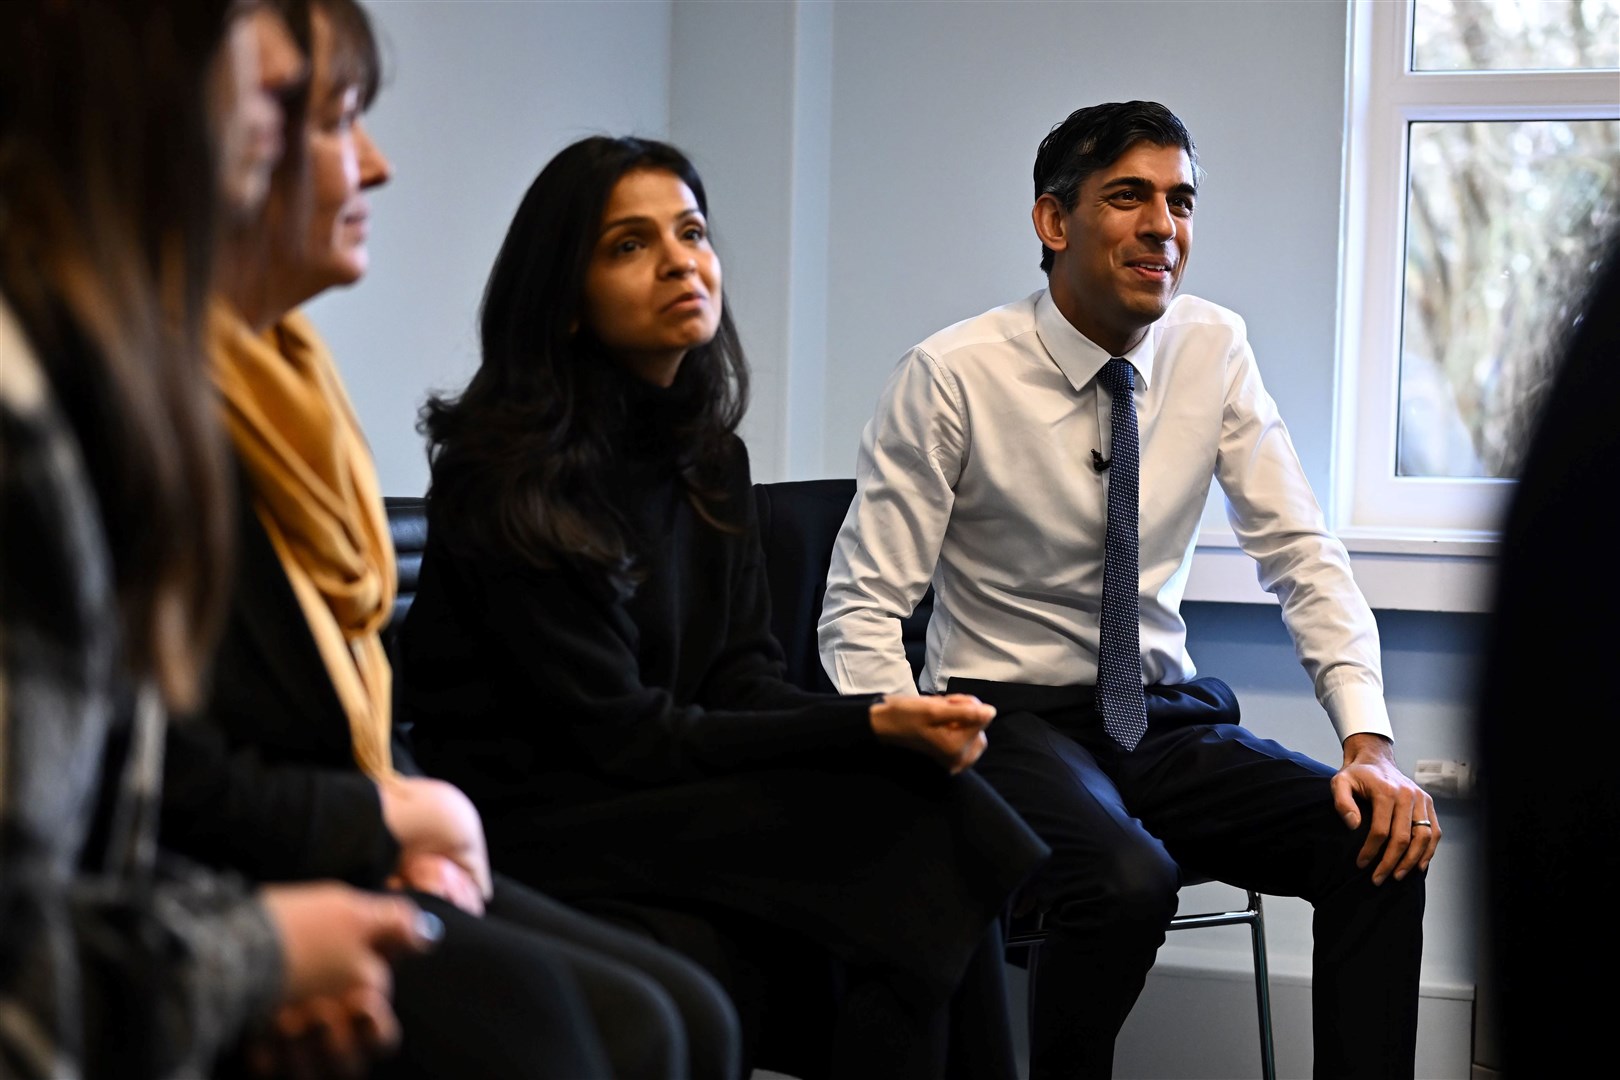 Prime Minister Rishi Sunak and his wife Akshata Murty attend a parenting workshop during a visit to a family hub in St Austell, central Cornwall (Ben Stansall/PA)